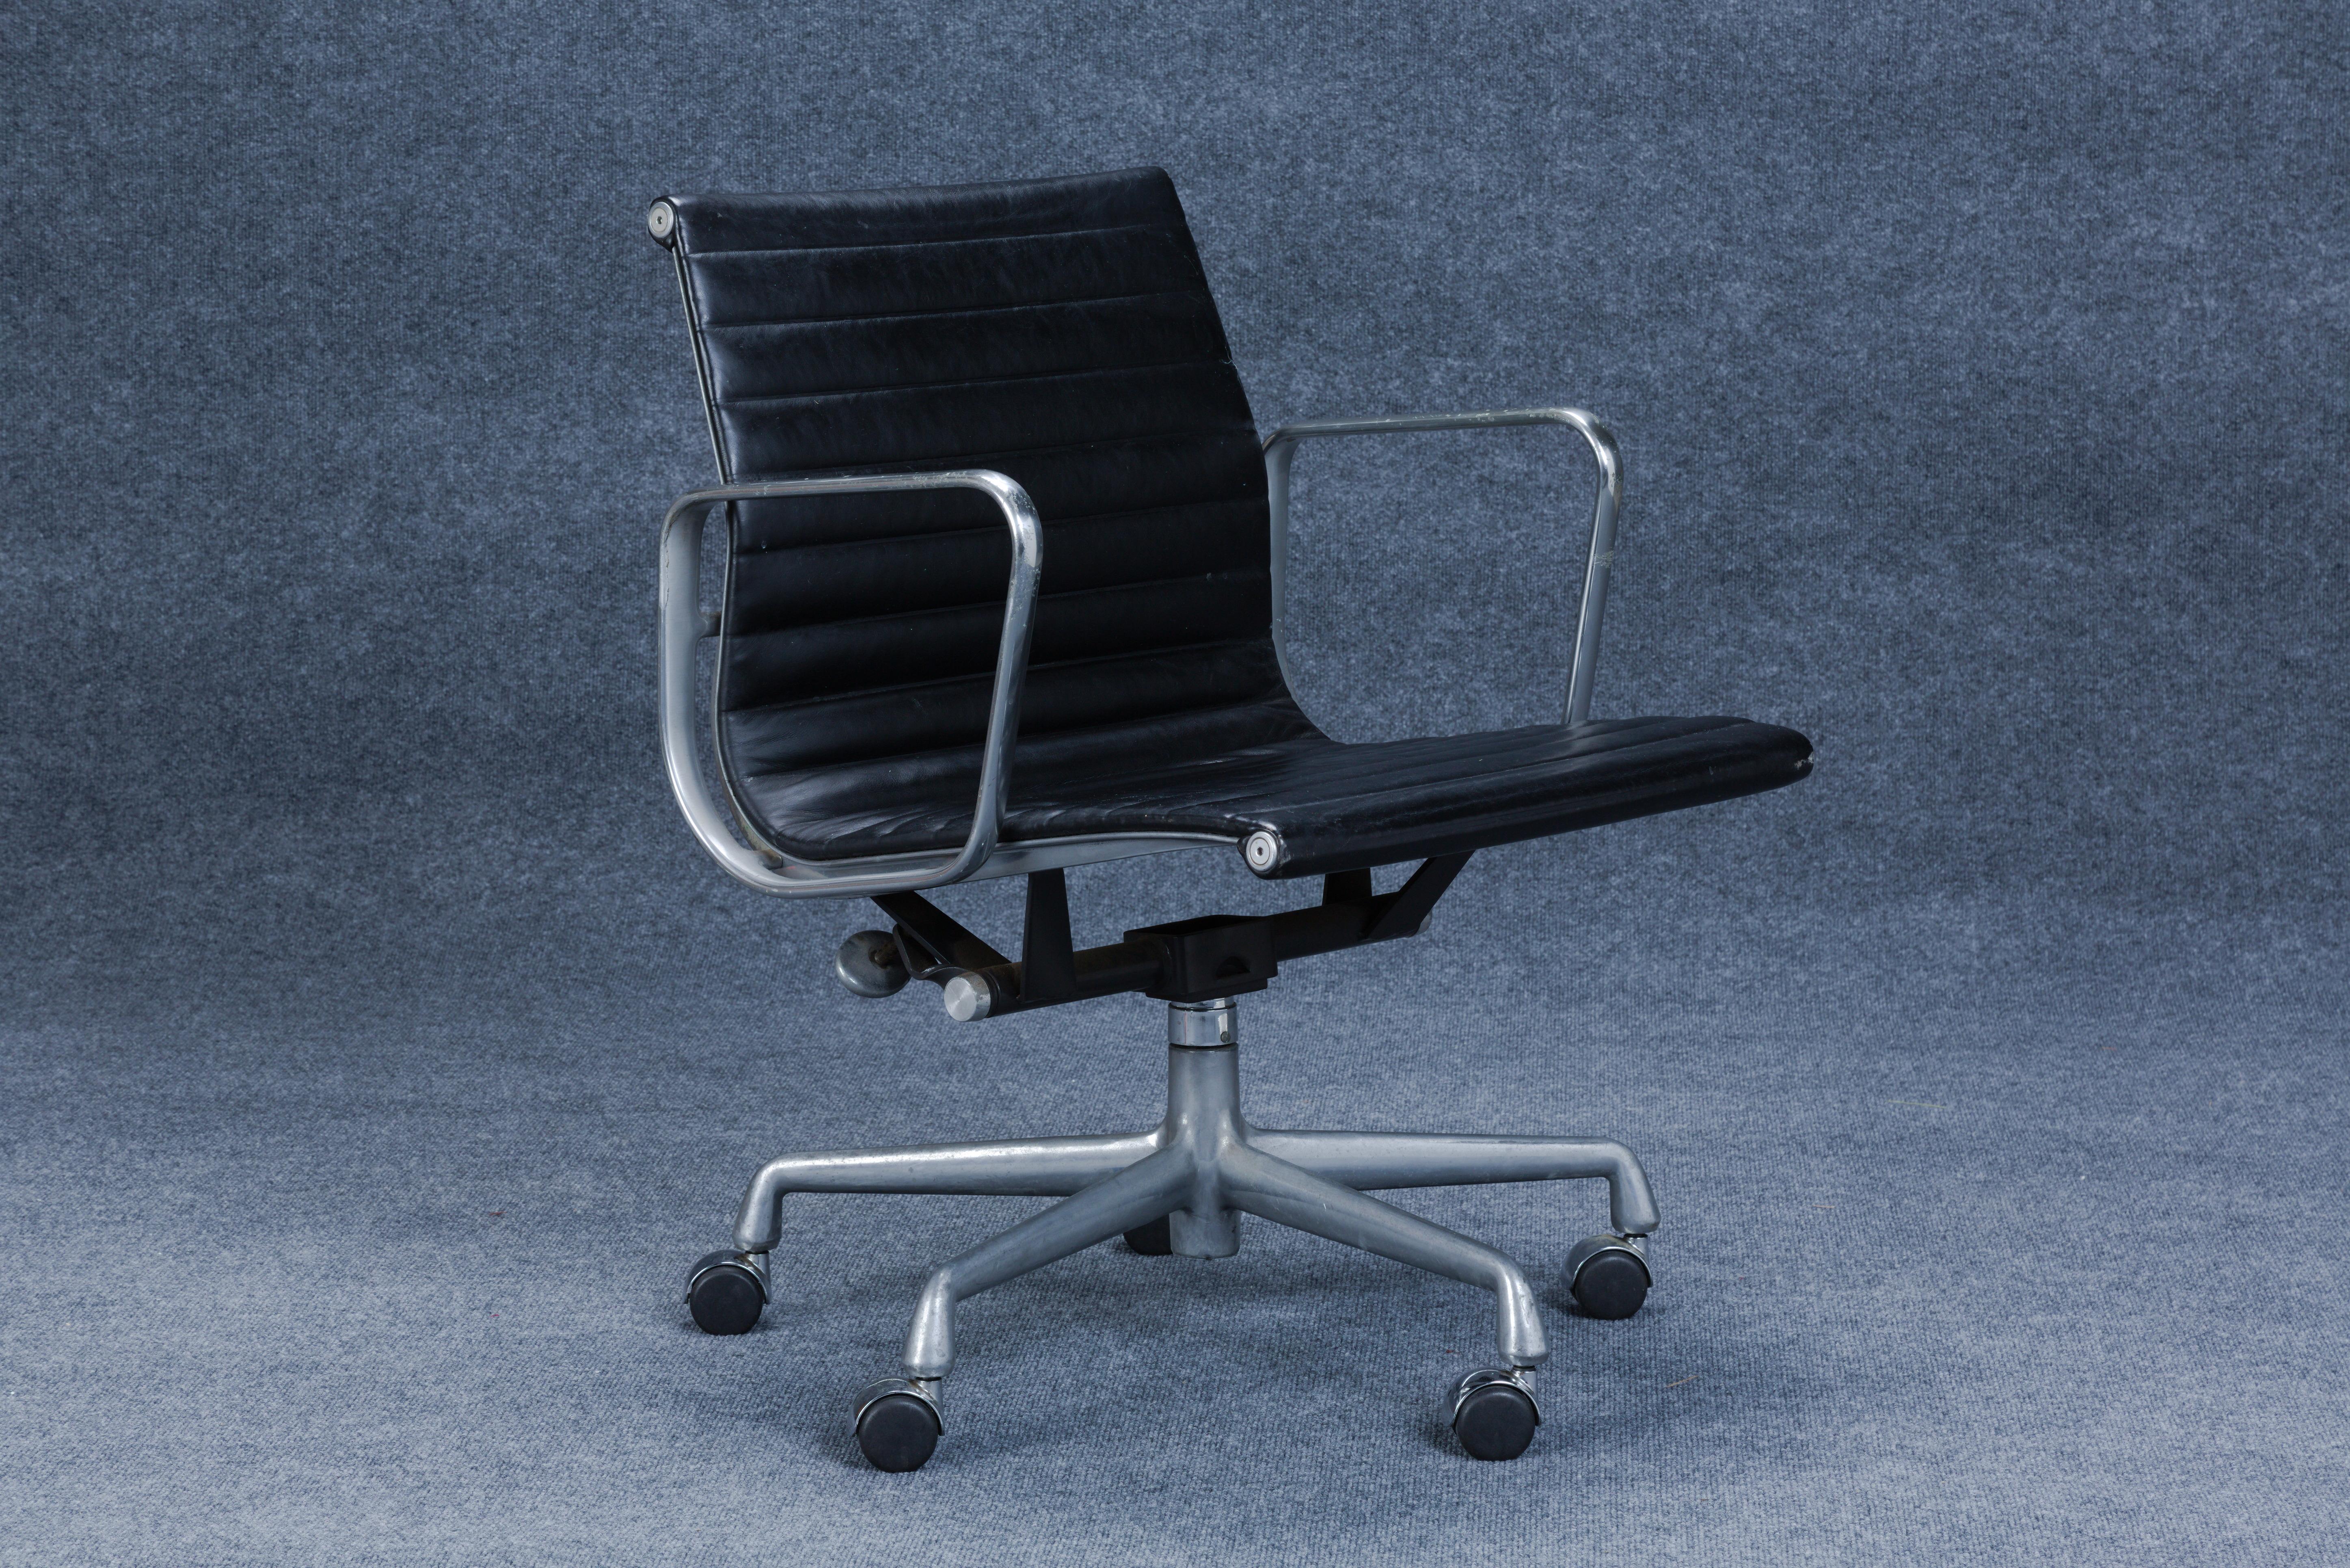 Mid-Century Modern Herman Miller Aluminum Group Management Chair by Charles Eames, c. 1965 For Sale